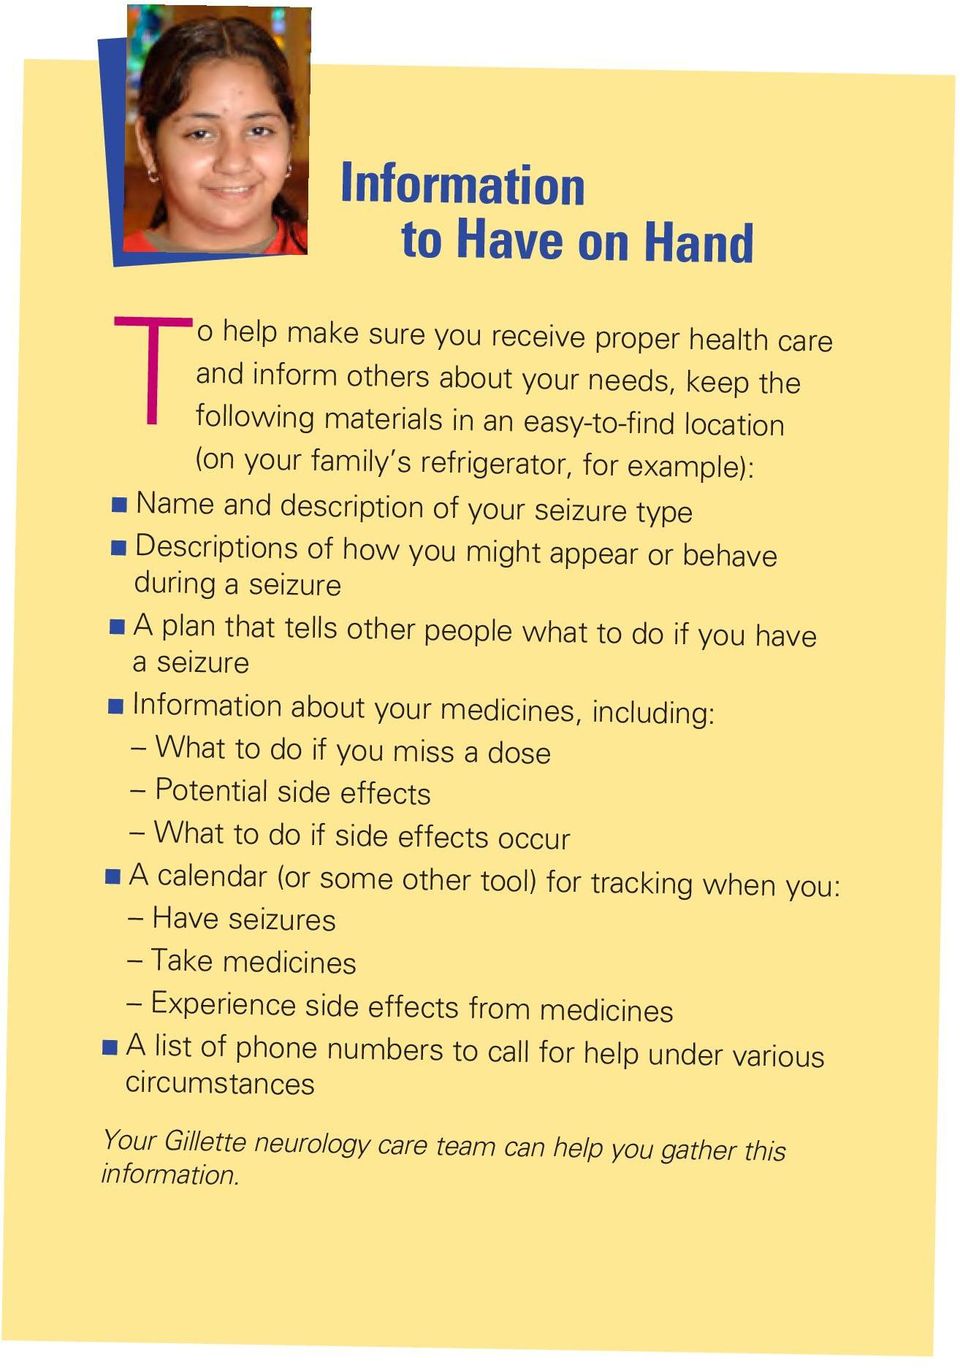 seizure n Information about your medicines, including: What to do if you miss a dose Potential side effects What to do if side effects occur n A calendar (or some other tool) for tracking when you: